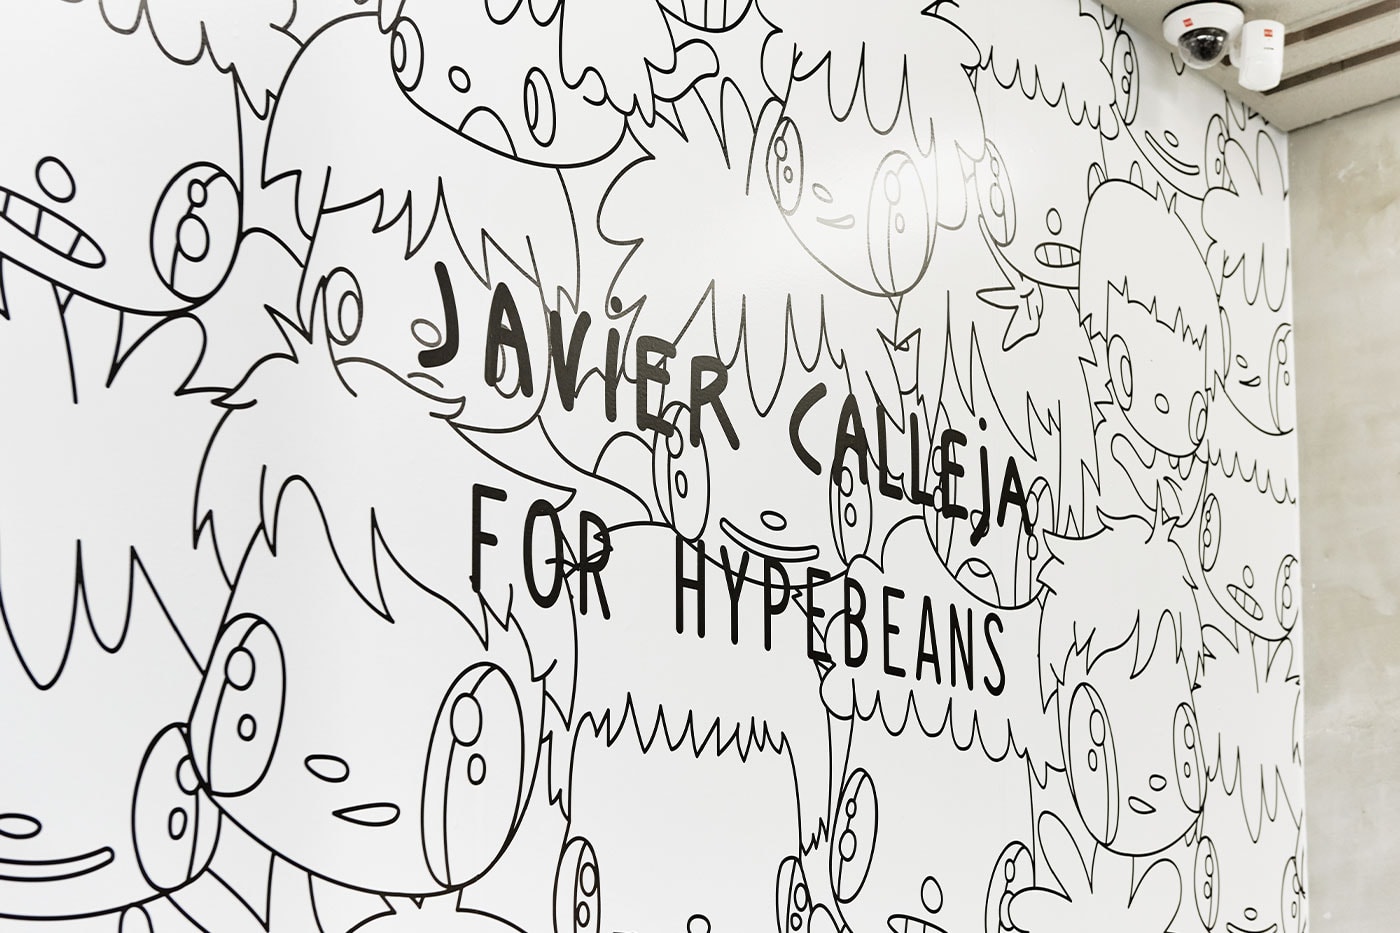 Take a Look Inside the Redesigned Hypebeans Hong Kong and Seoul, Inspired by Javier Calleja cafeto artist spanish coffee cafe landmark centerfield